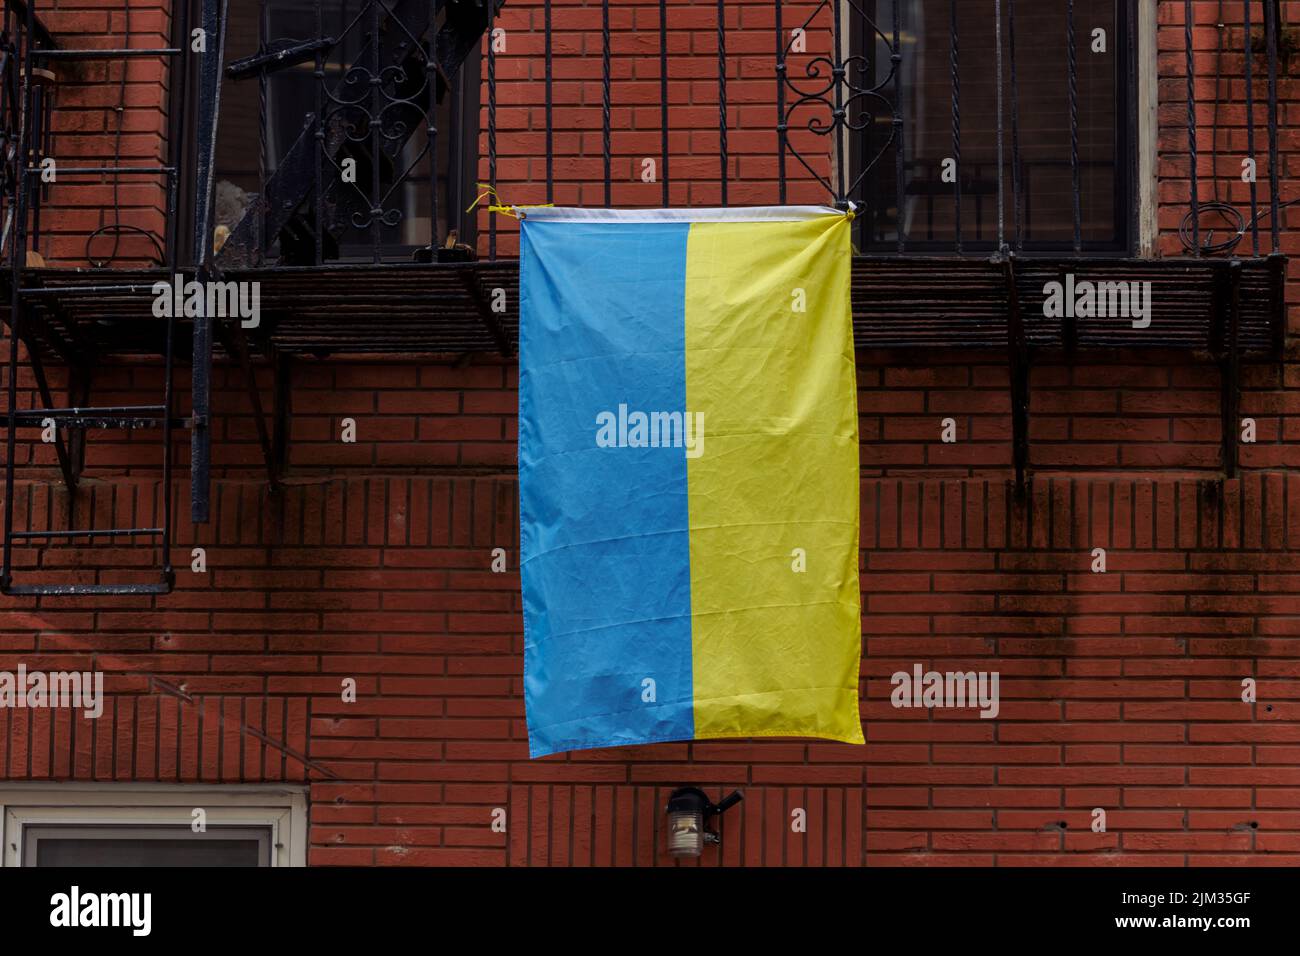 a Ukrainian flag hanging from a fire escape off the side of a red brick building in new york city, showing solidarity with Ukraine Stock Photo